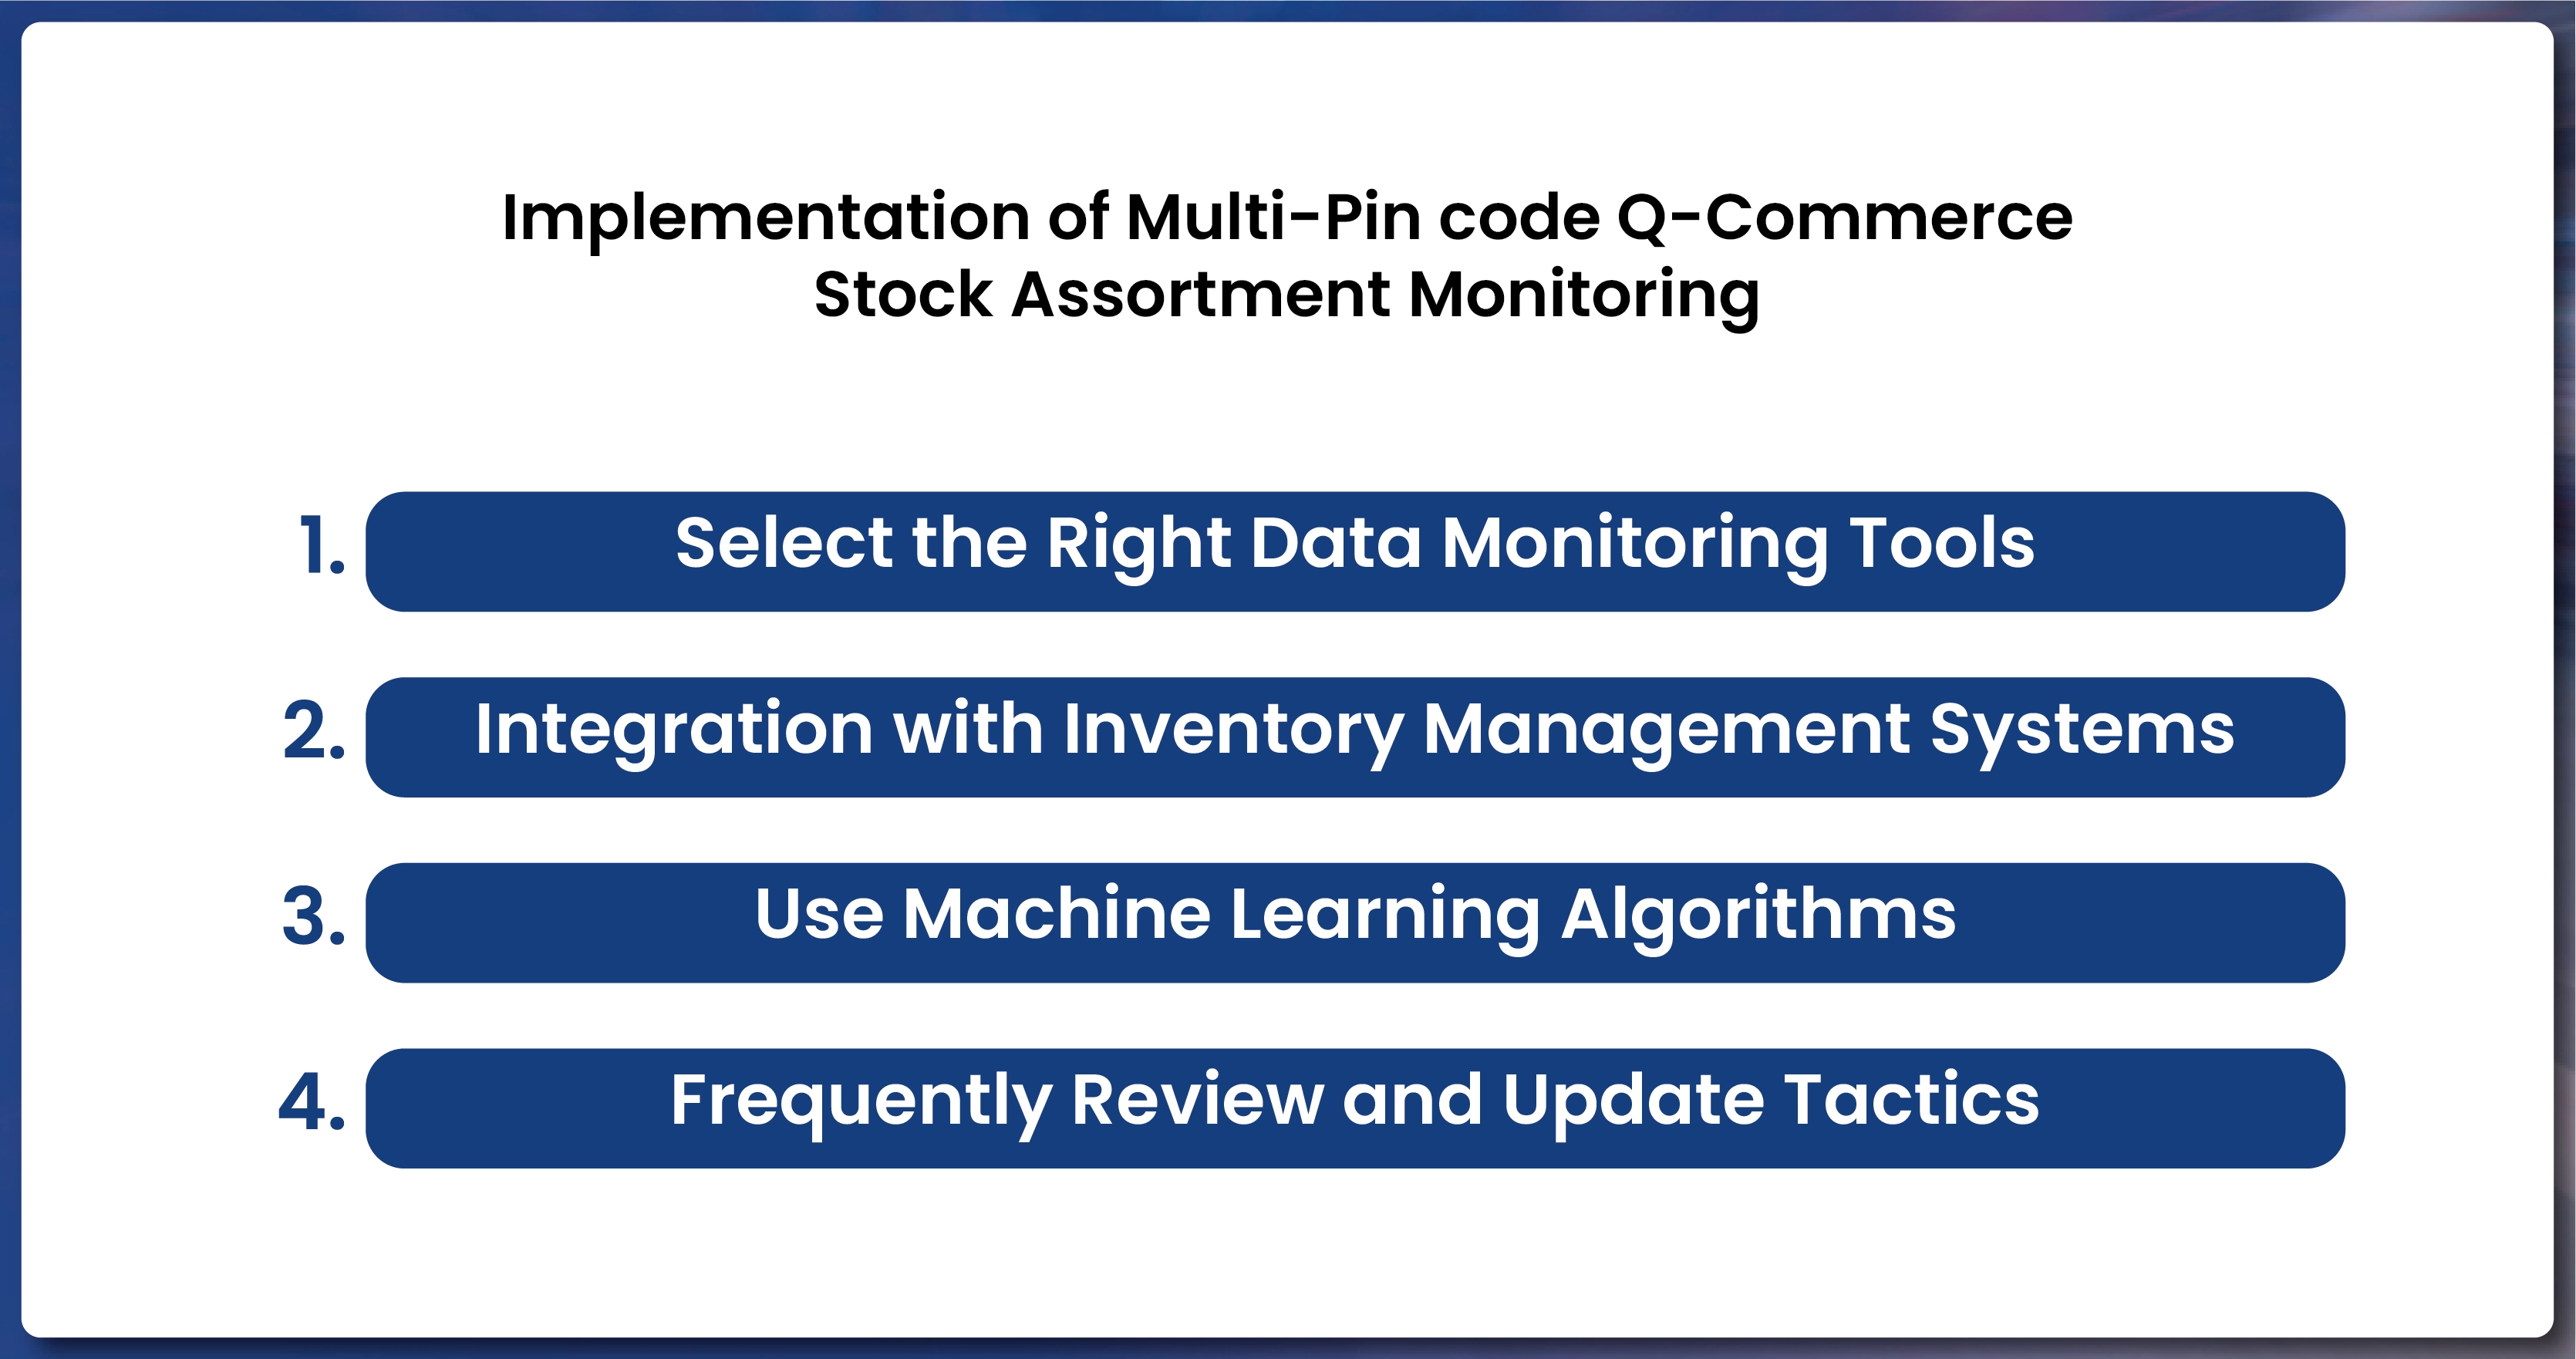 Implementation-of-Multi-Pin-code-Q-Commerce-Stock-Assortment-Monitoring-01